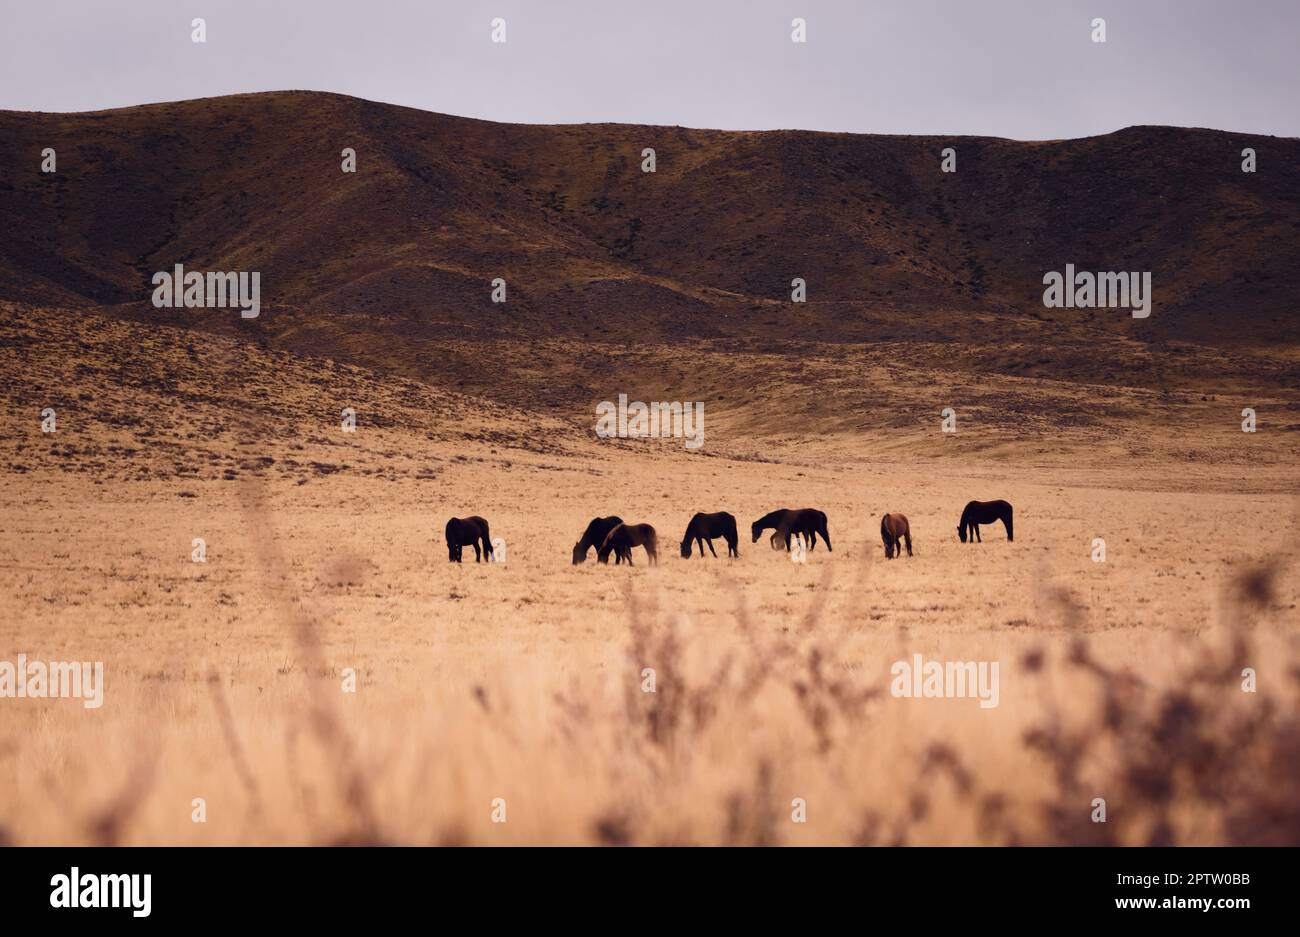 Horses grazing in a dry grassland in Valle de Uco, Mendoza, Argentina, in a dark cloudy day. Stock Photo